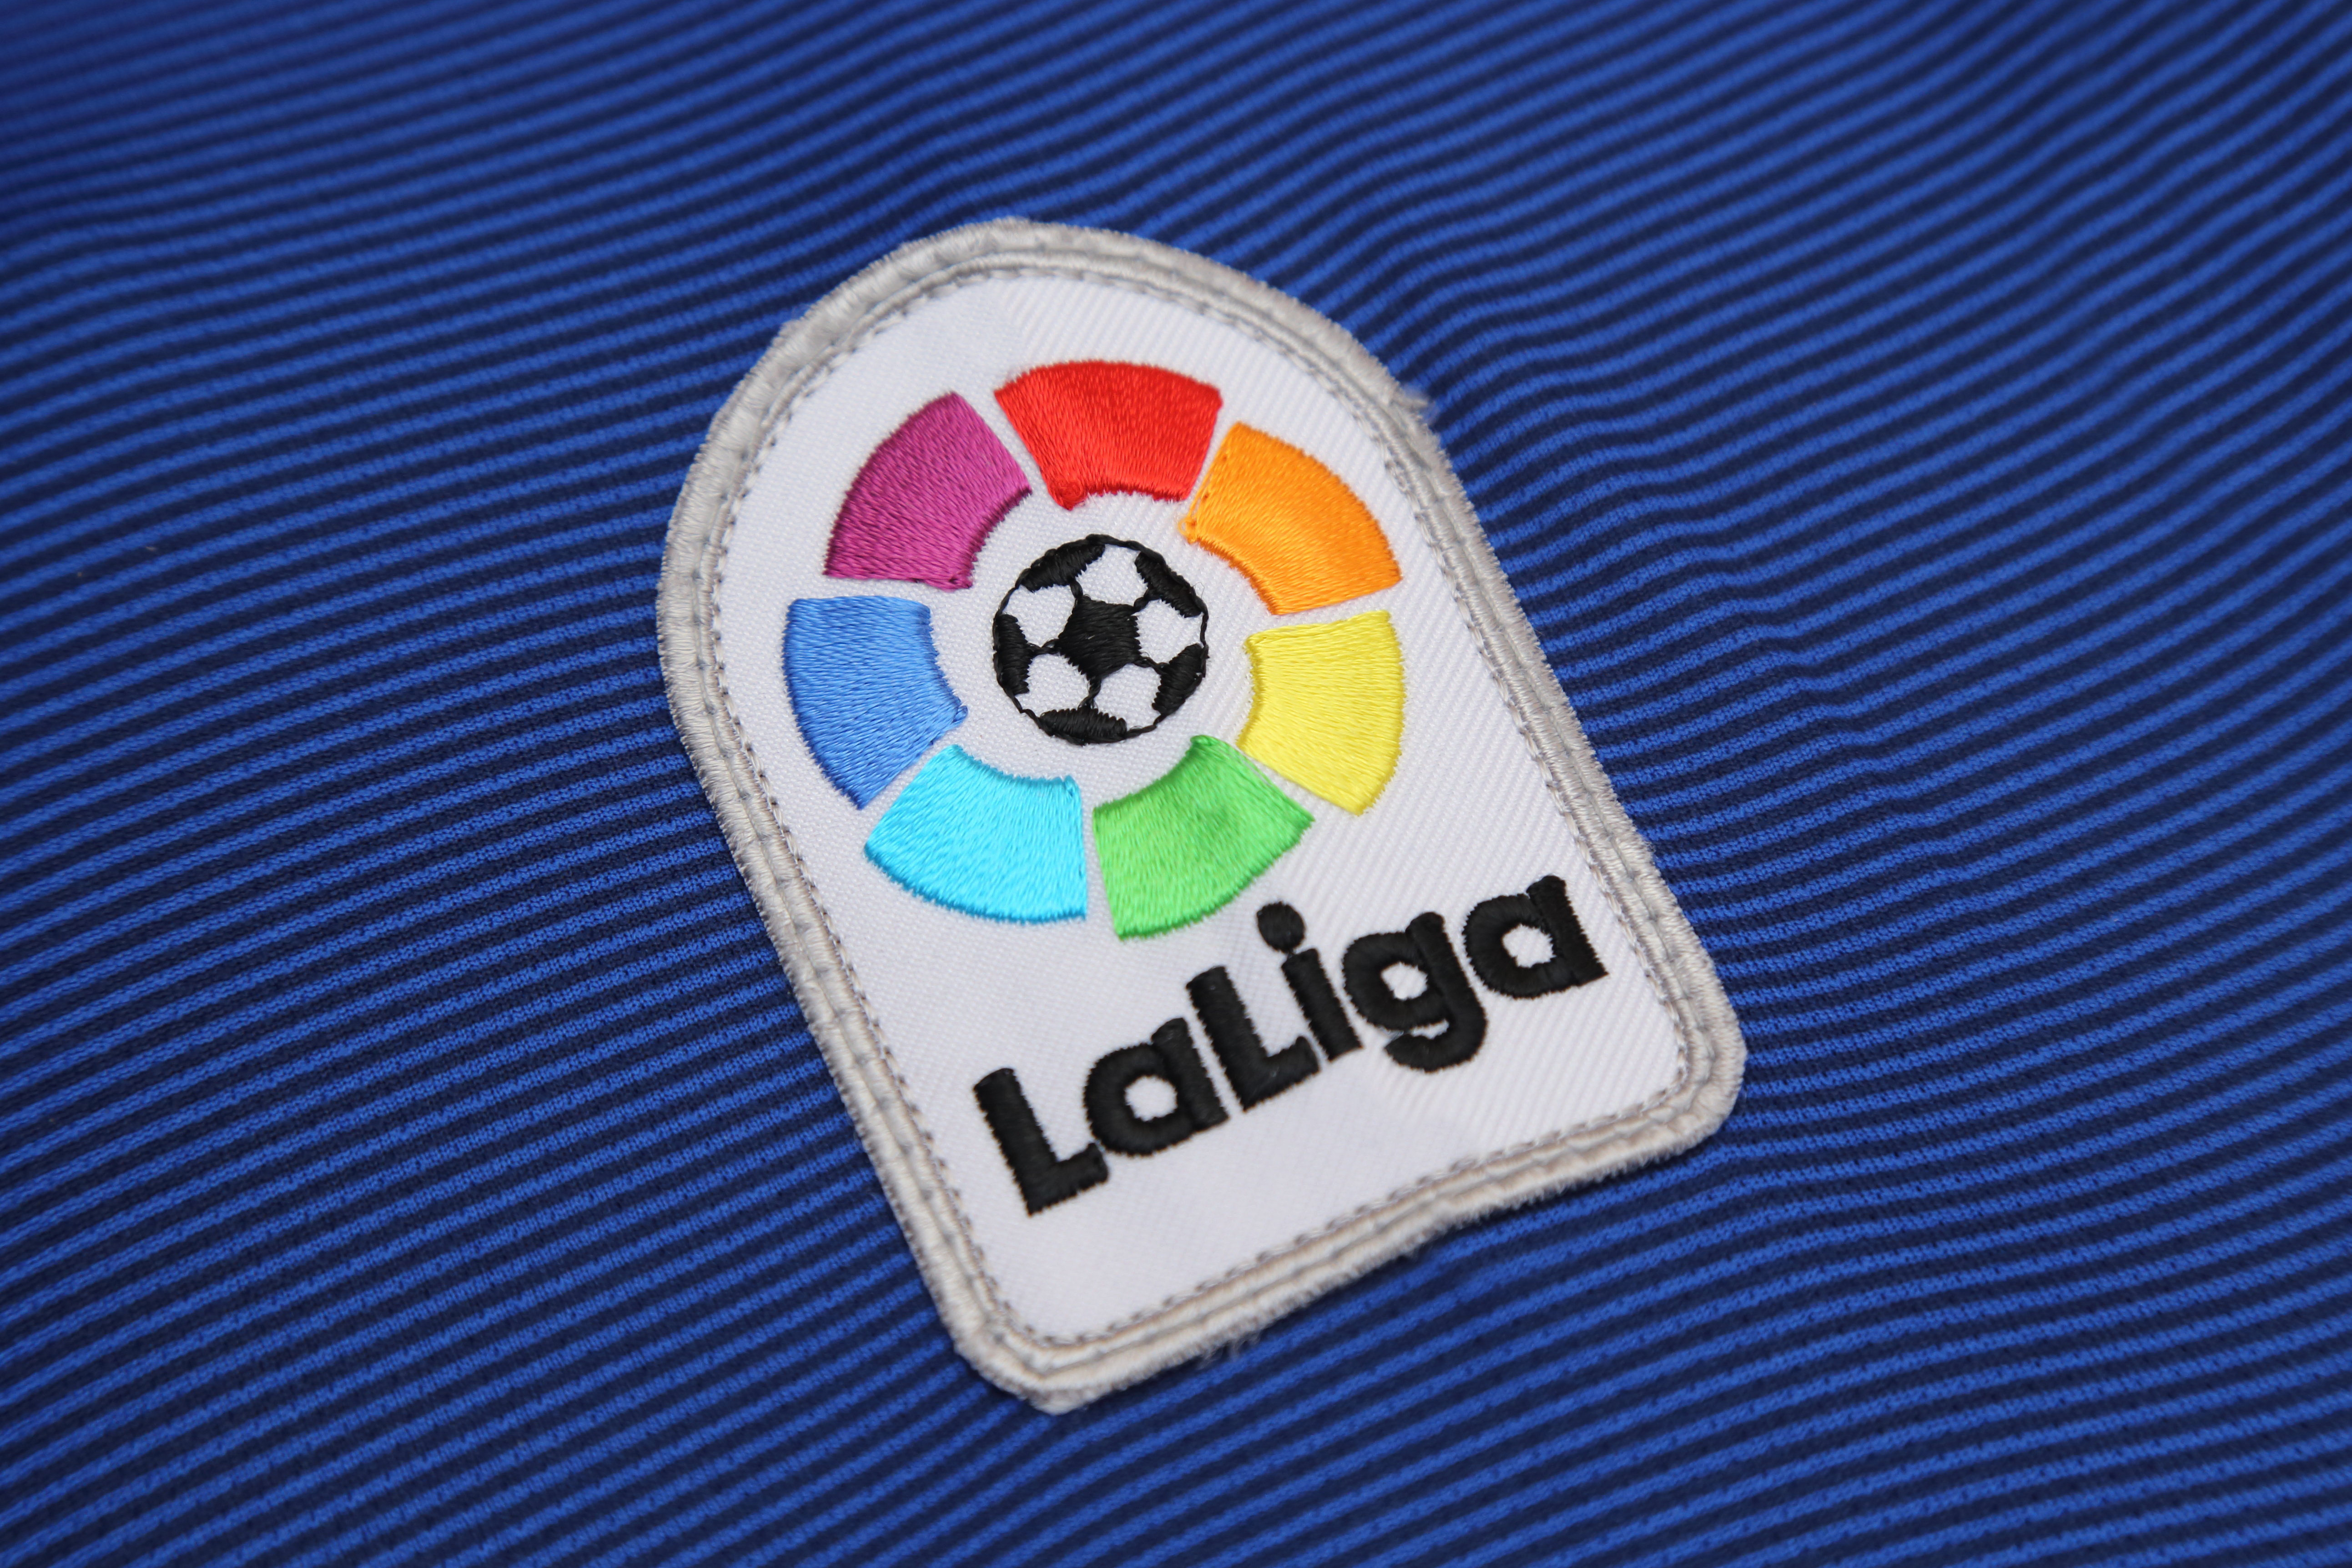 Six La Liga Clubs Are Without Shirt Sponsors Due to Ban on Gambling Brands